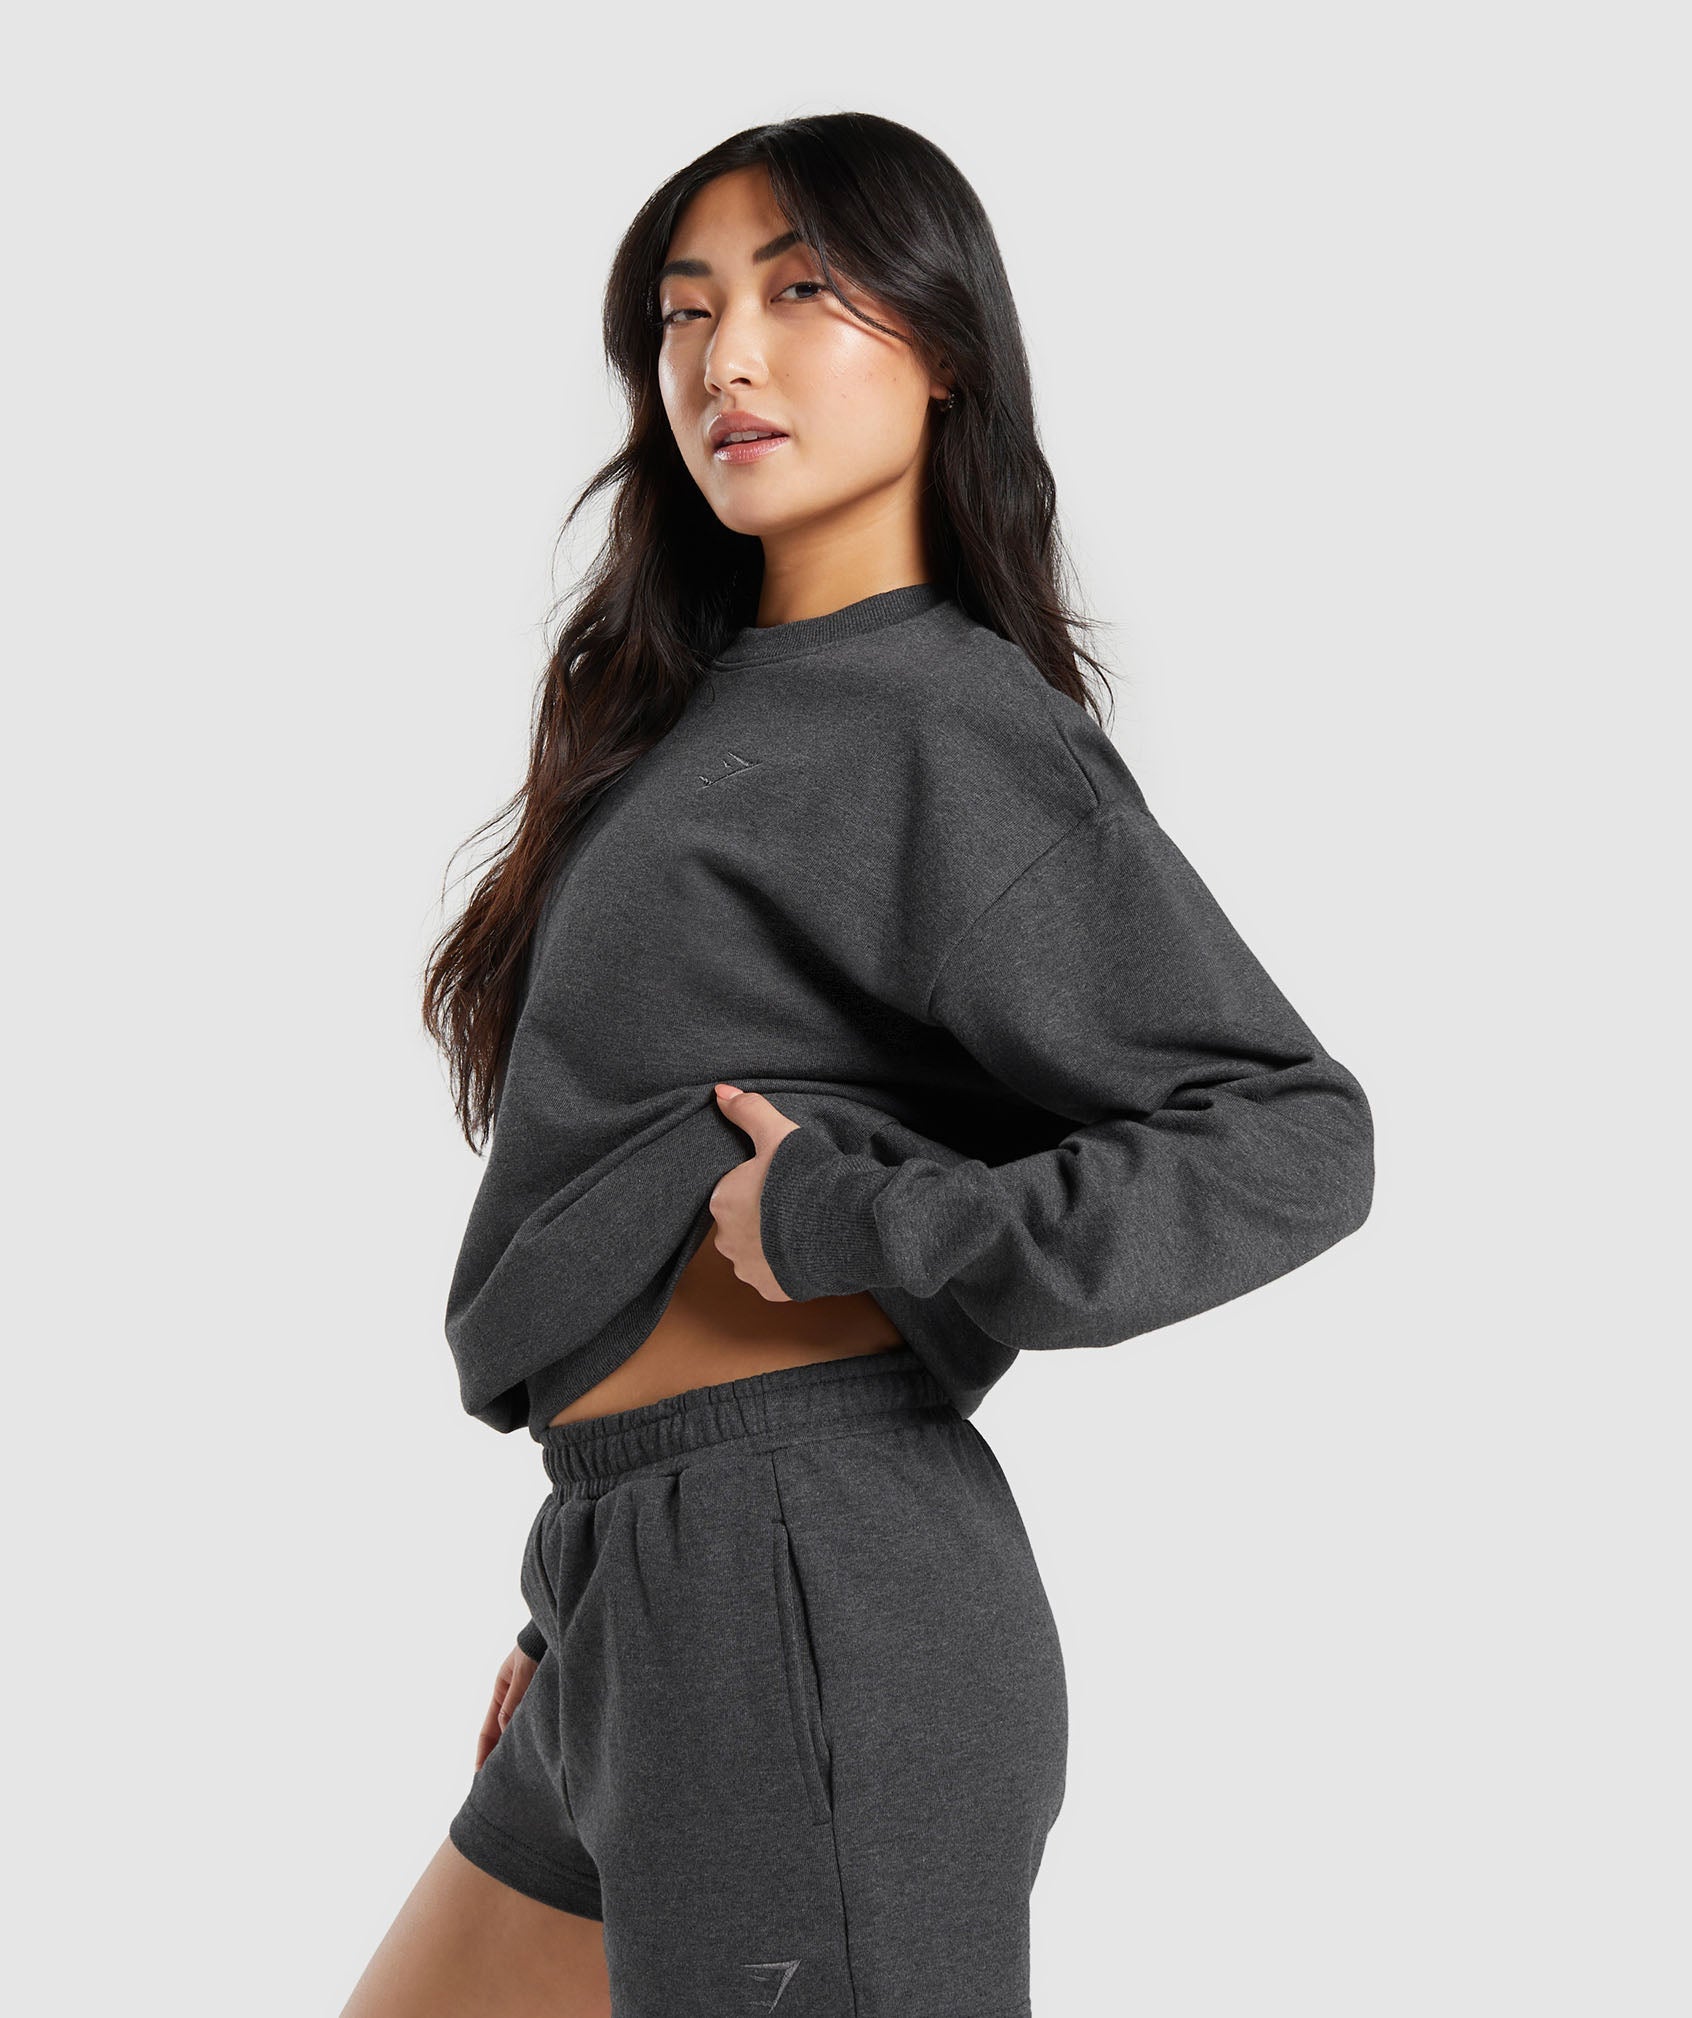 Rest Day Sweats Crew in Black Core Marl - view 3